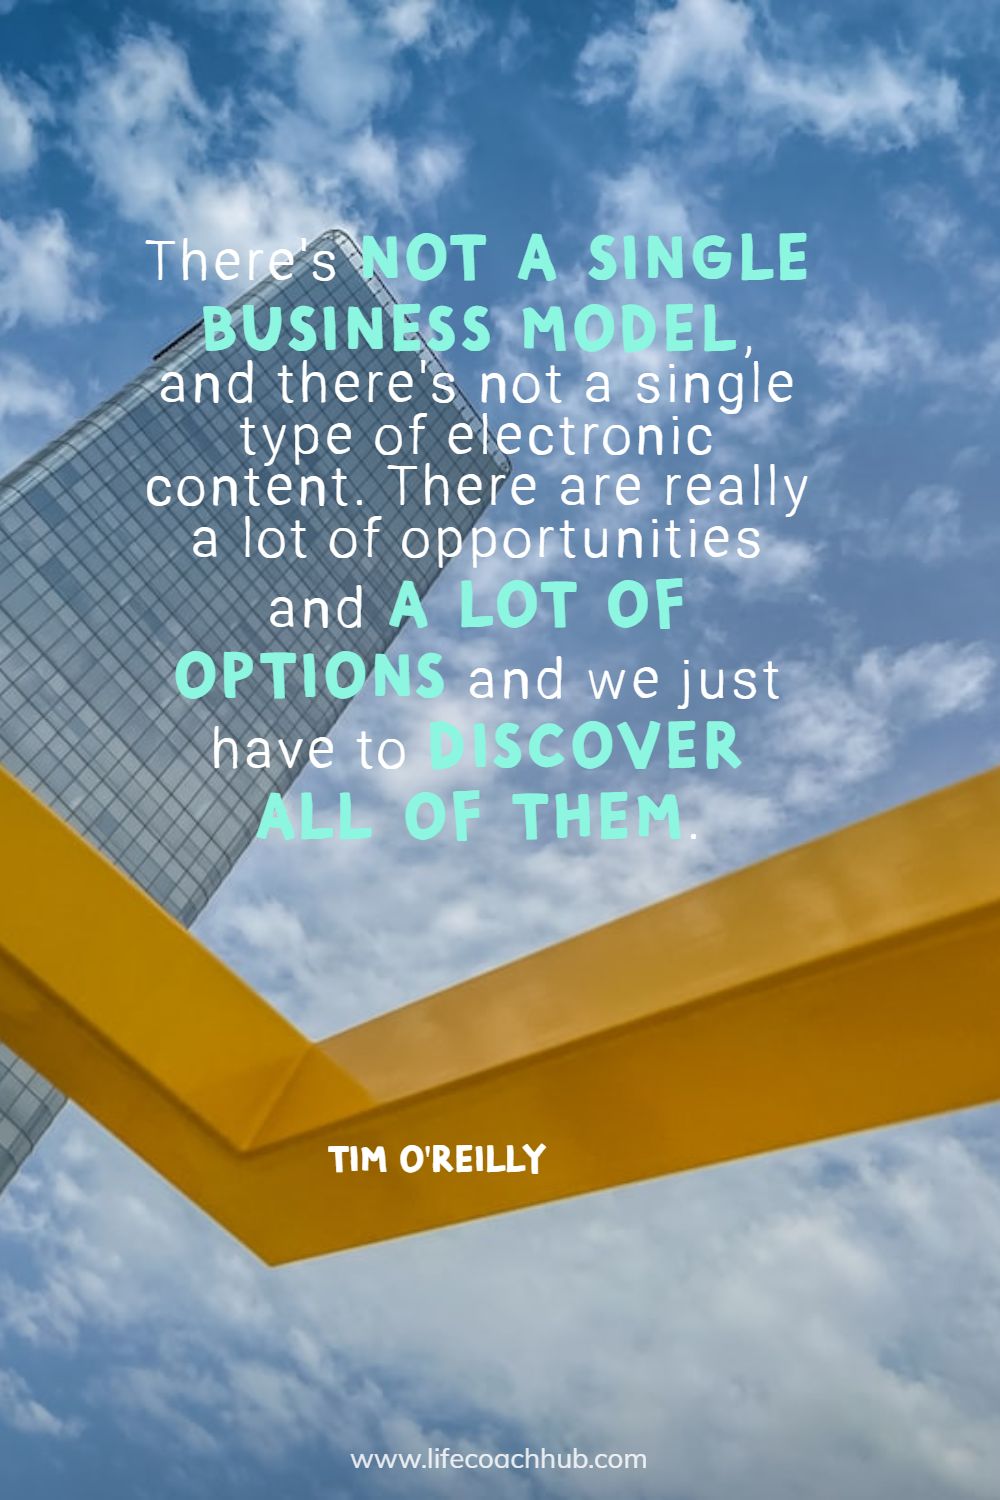 There's not a single business model, and there's not a single type of electronic content. There are really a lot of opportunities and a lot of options and we just have to discover all of them. Tim O'Reilly Coaching Quote